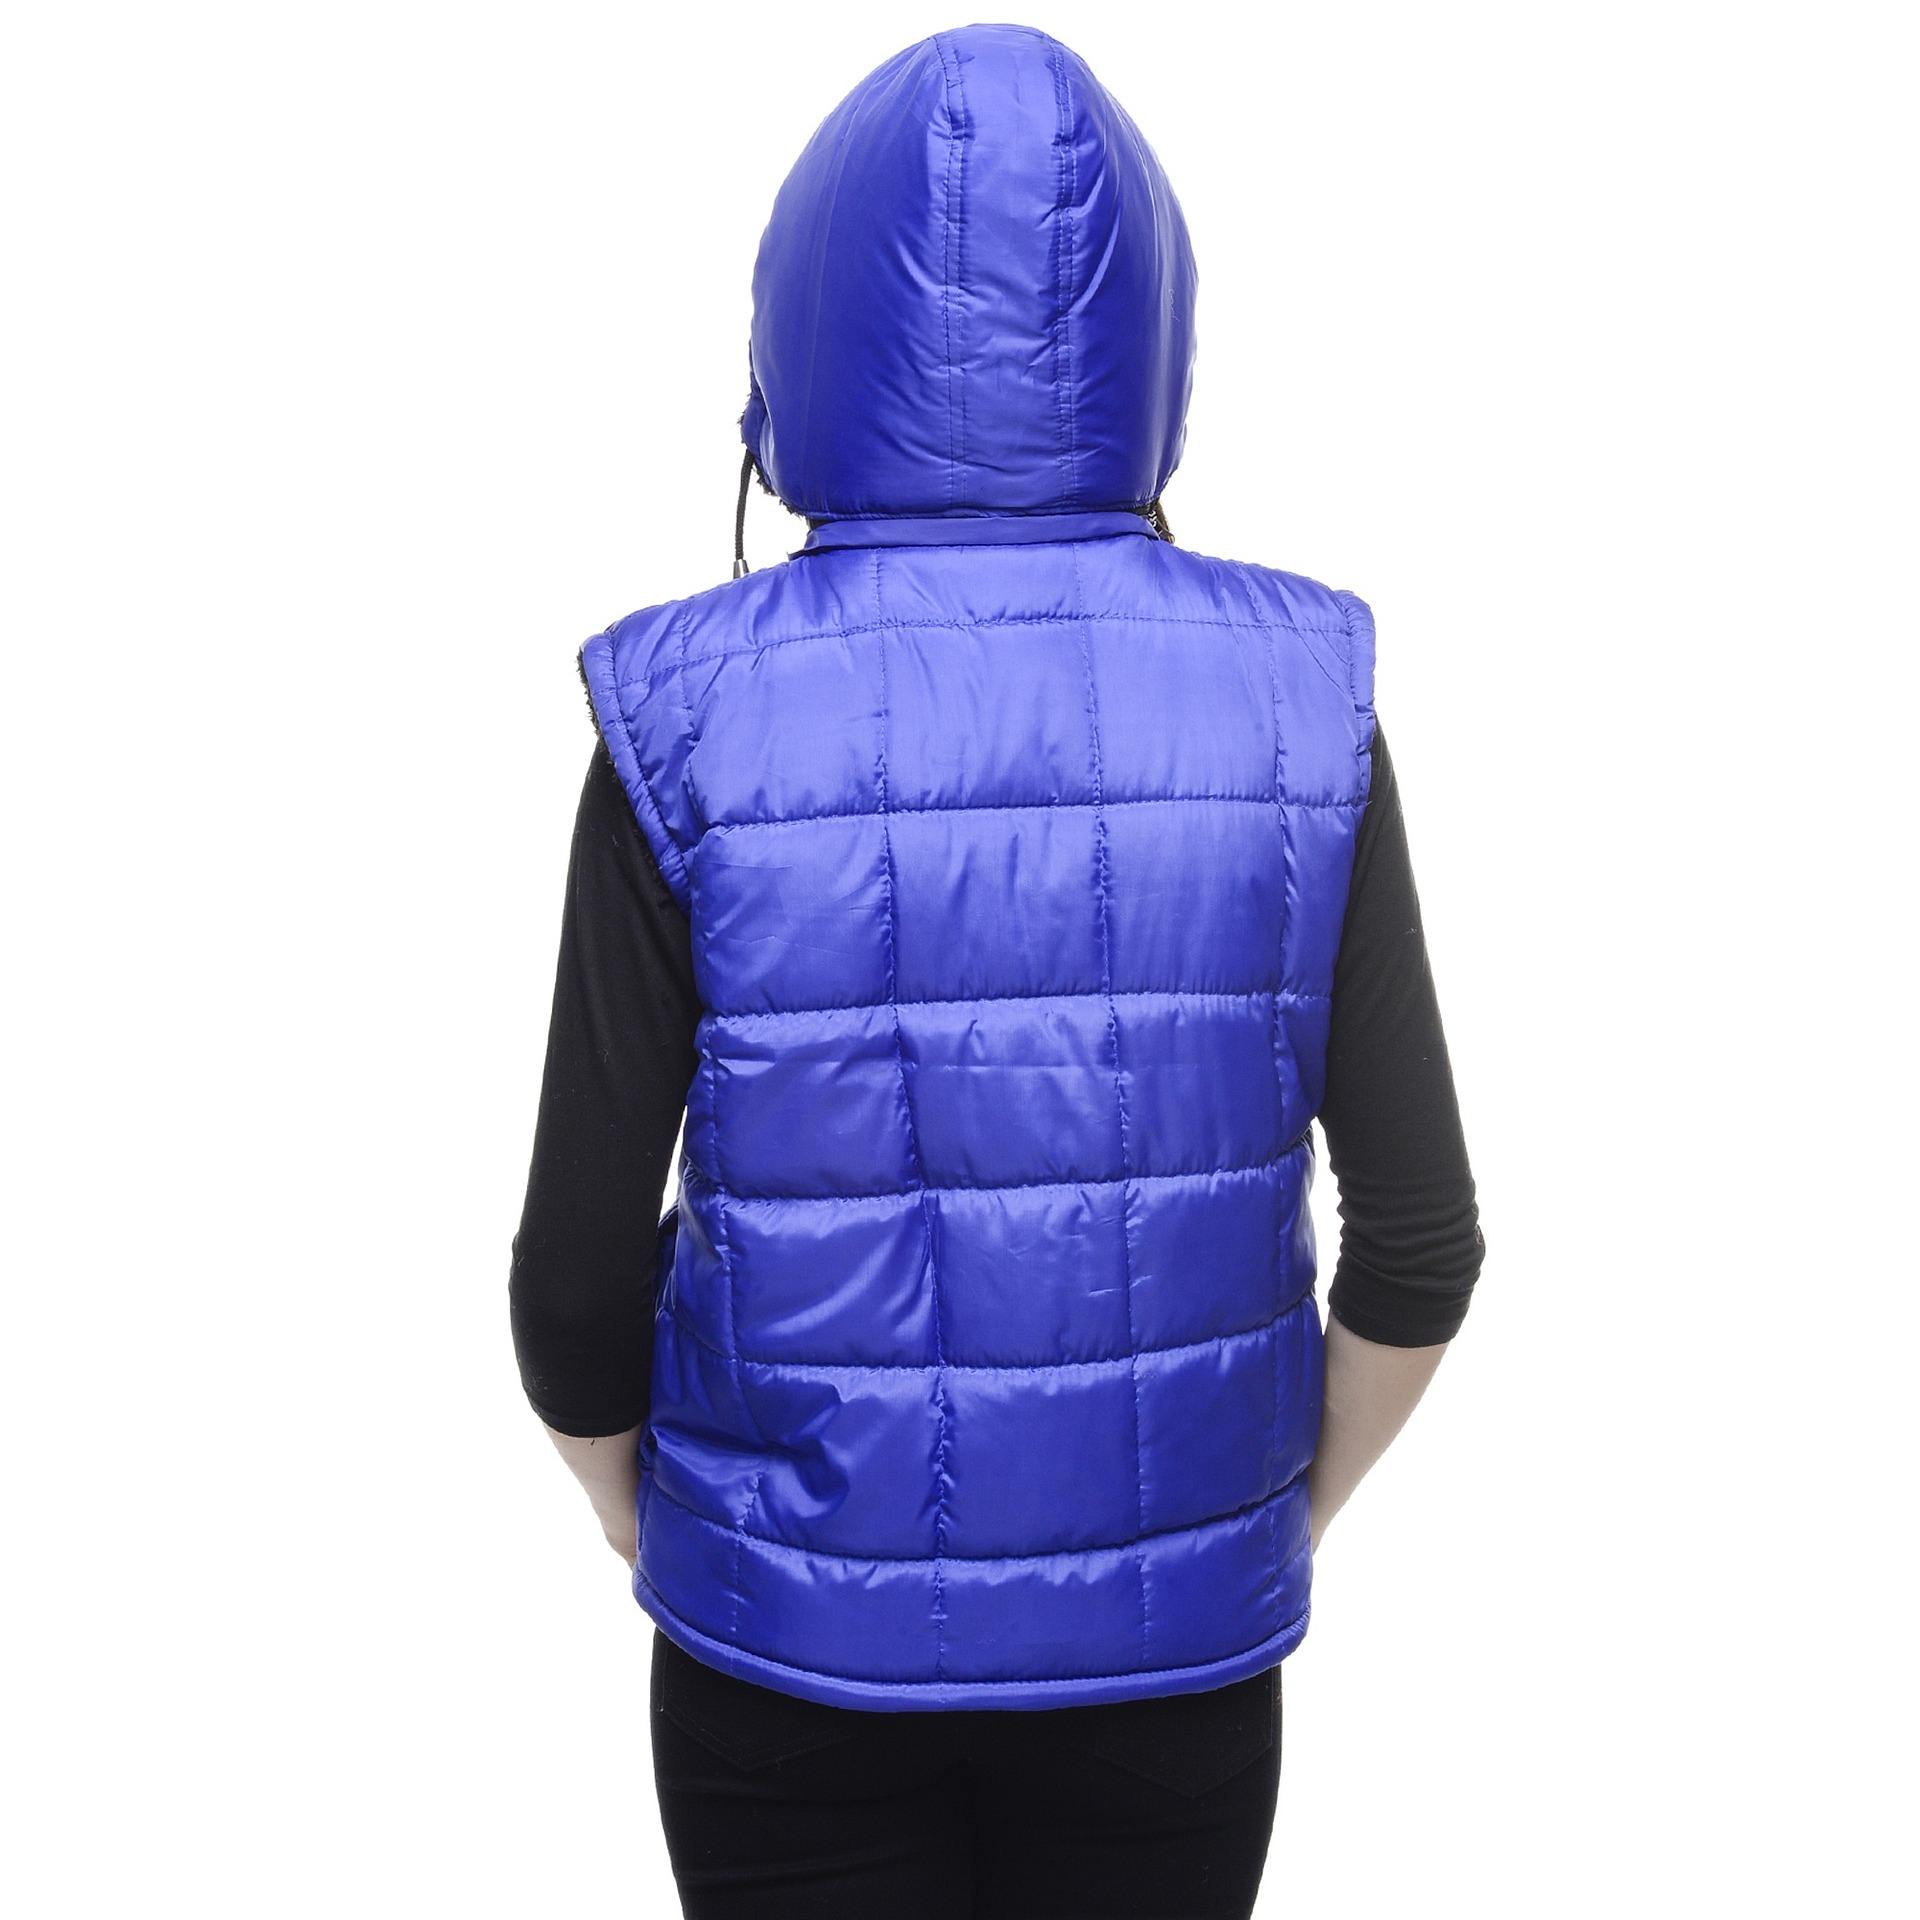 Outerwear vests from Canada